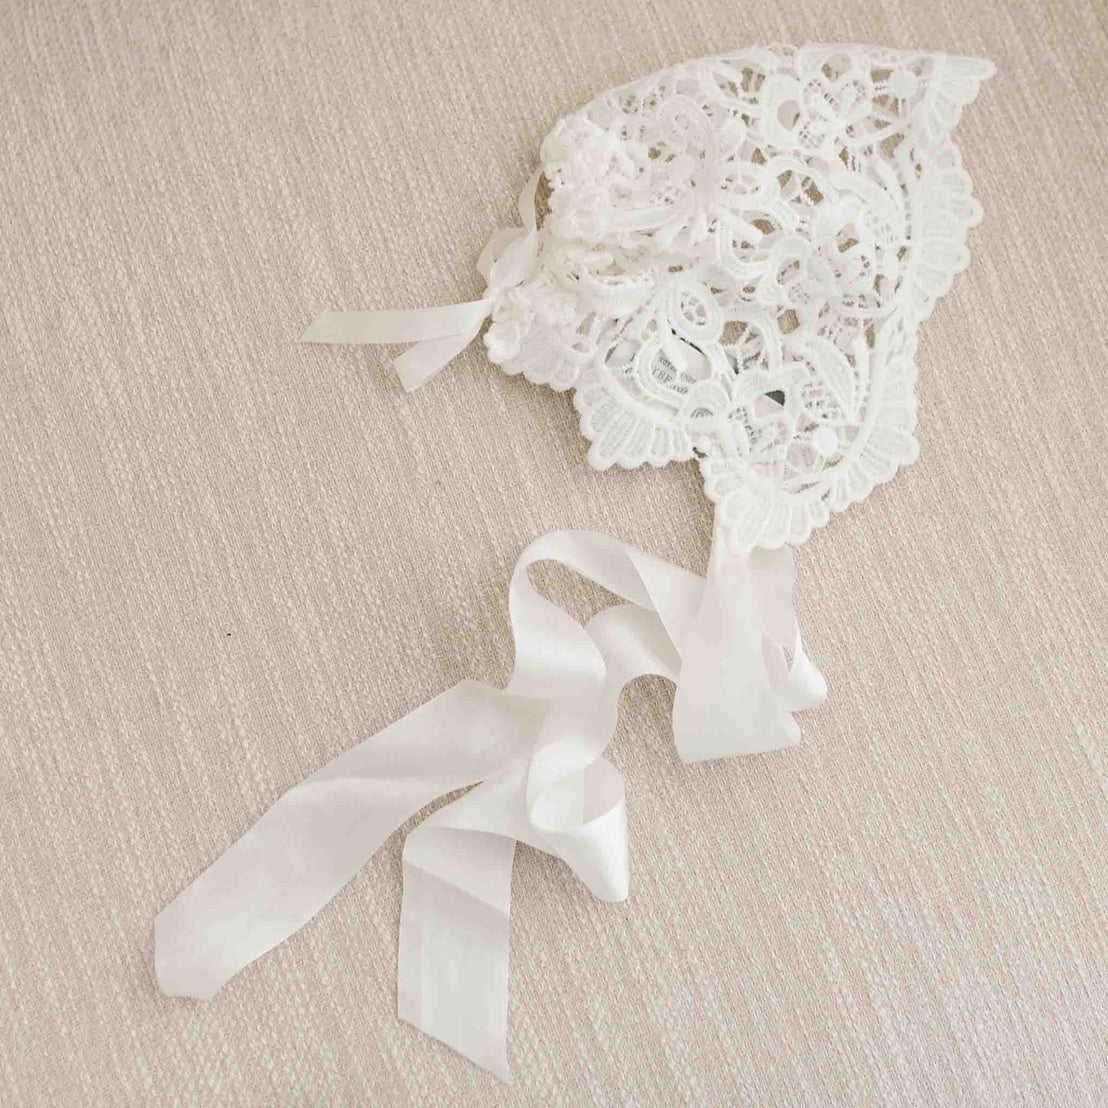 Flat lay of the Lola Lace Bonnet. The lace bonnet is designed with richly embroidered light ivory lace and cotton floral edge lace at the back.